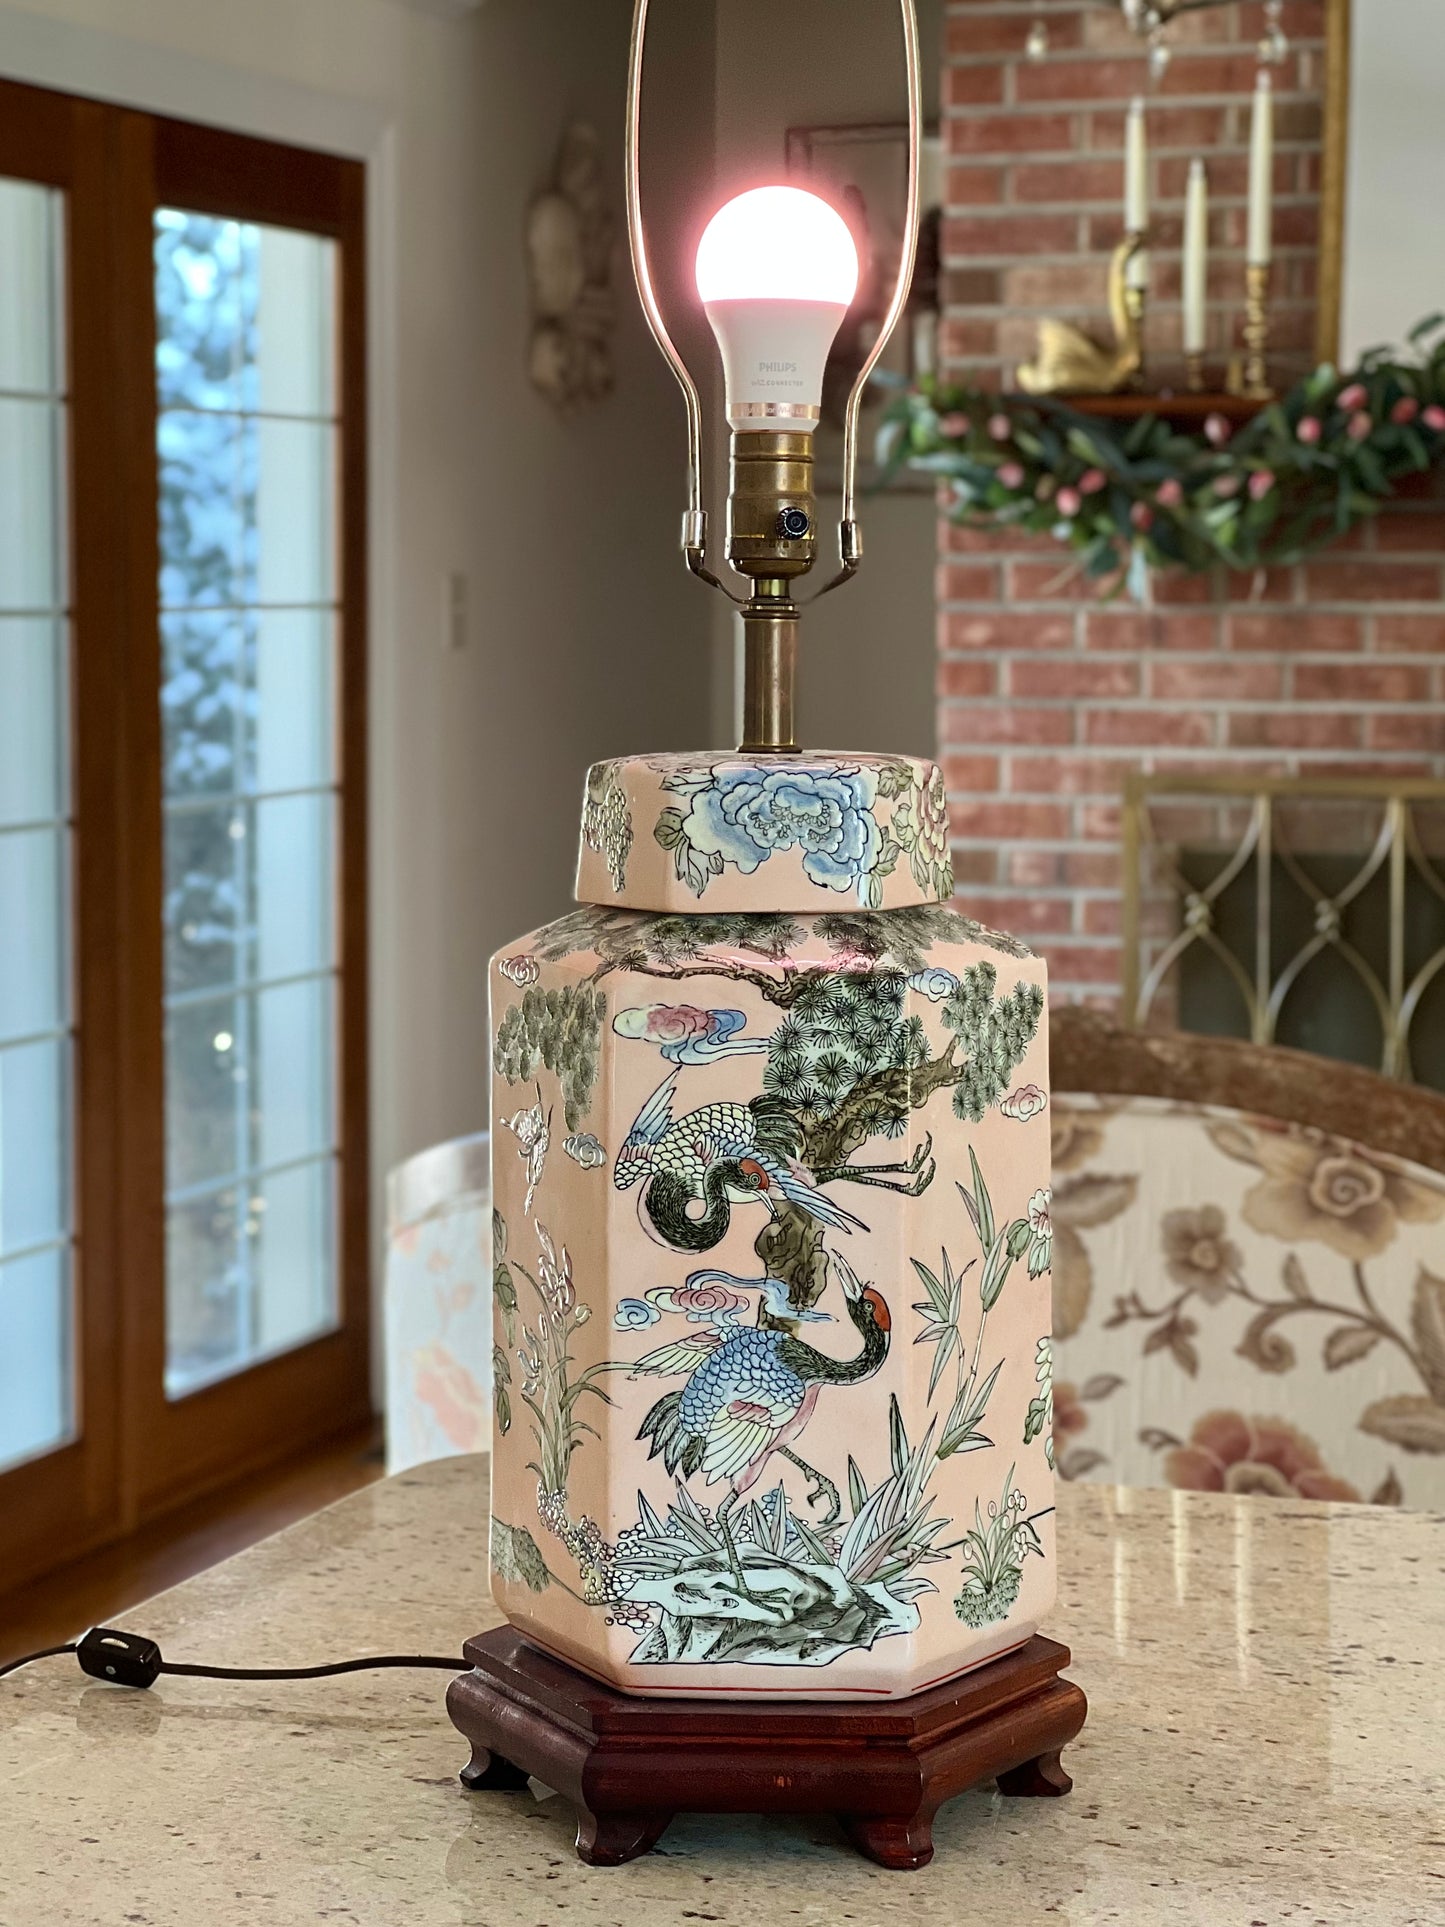 Vintage Chinoiserie Hexagonal Table Lamp, 31.5” to top of finial - Excellent!